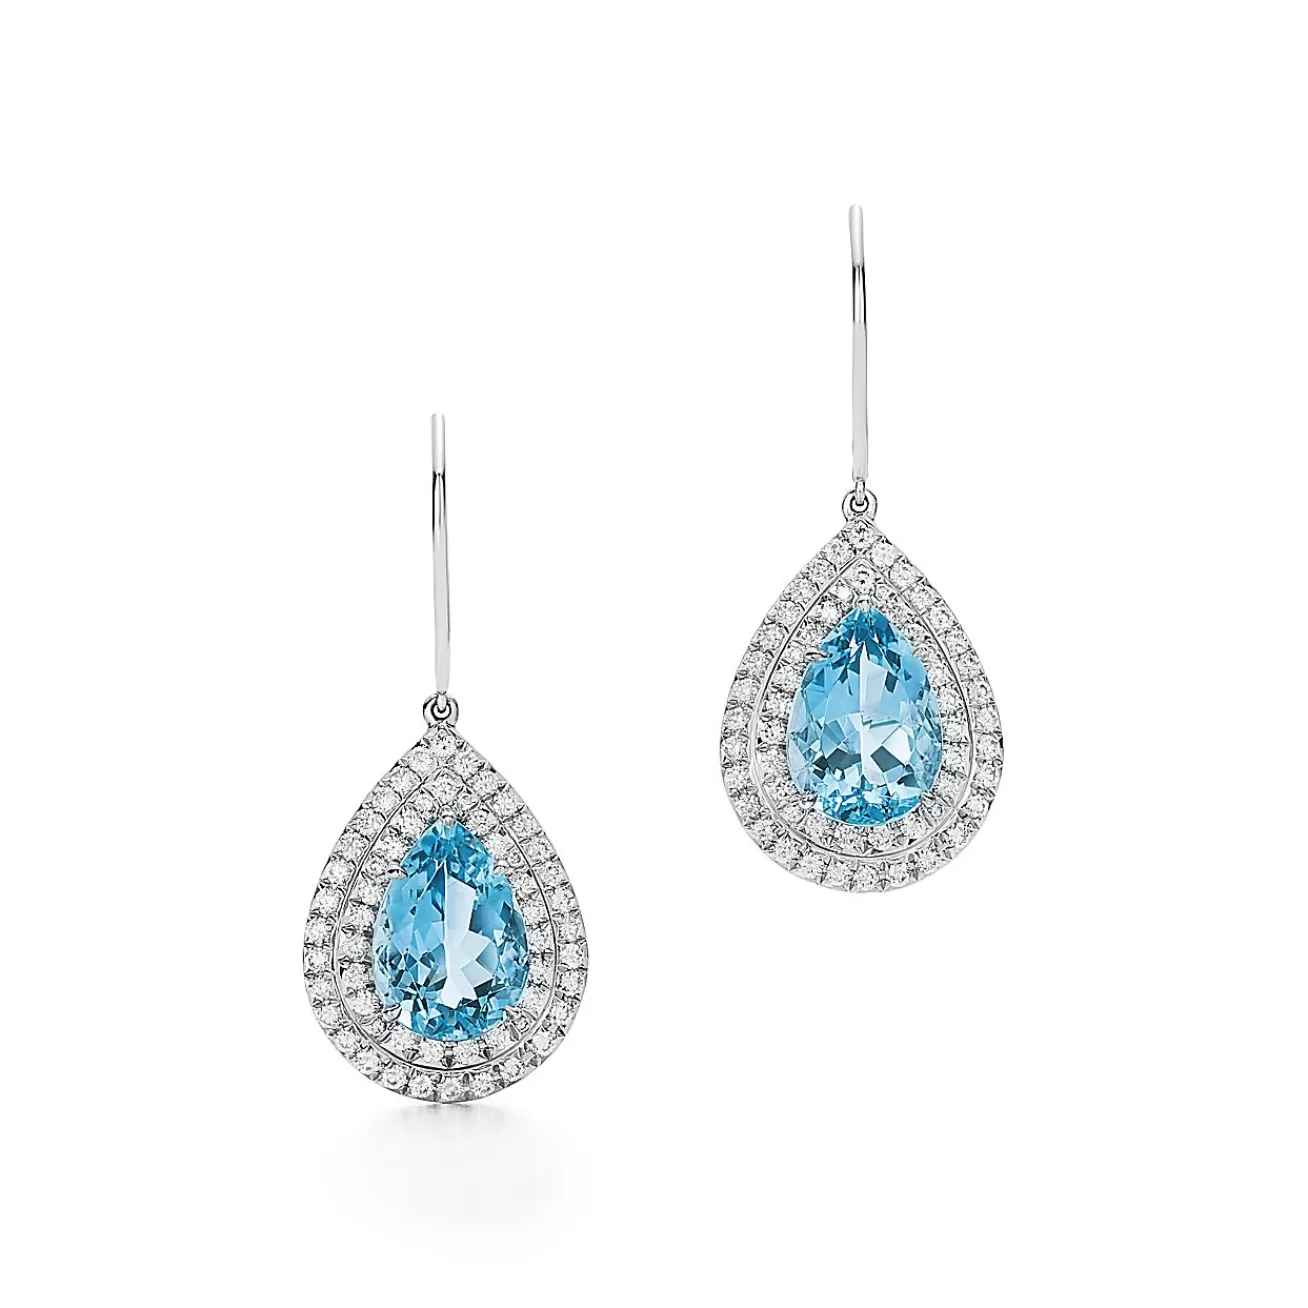 Tiffany & Co. Tiffany Soleste® earrings in platinum with diamonds and aquamarines. | ^ Earrings | Platinum Jewelry